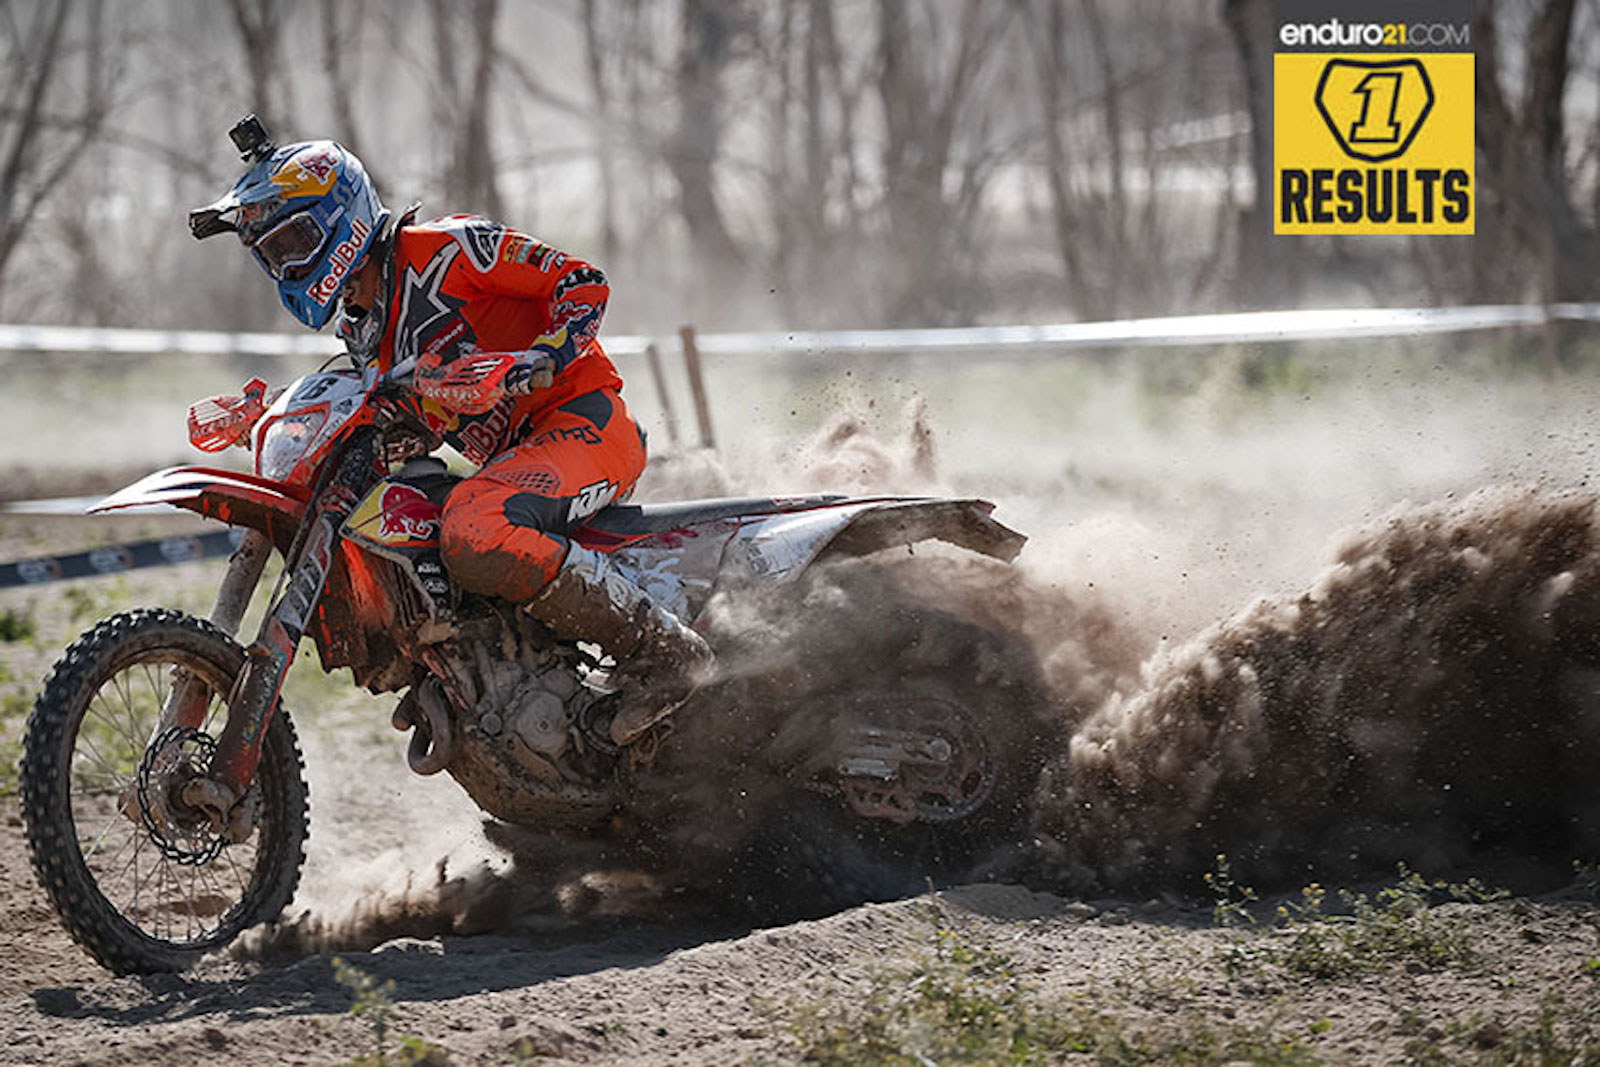 Results feed: BR2 Enduro Solsona 2019 WESS round 7 overall win for Garcia